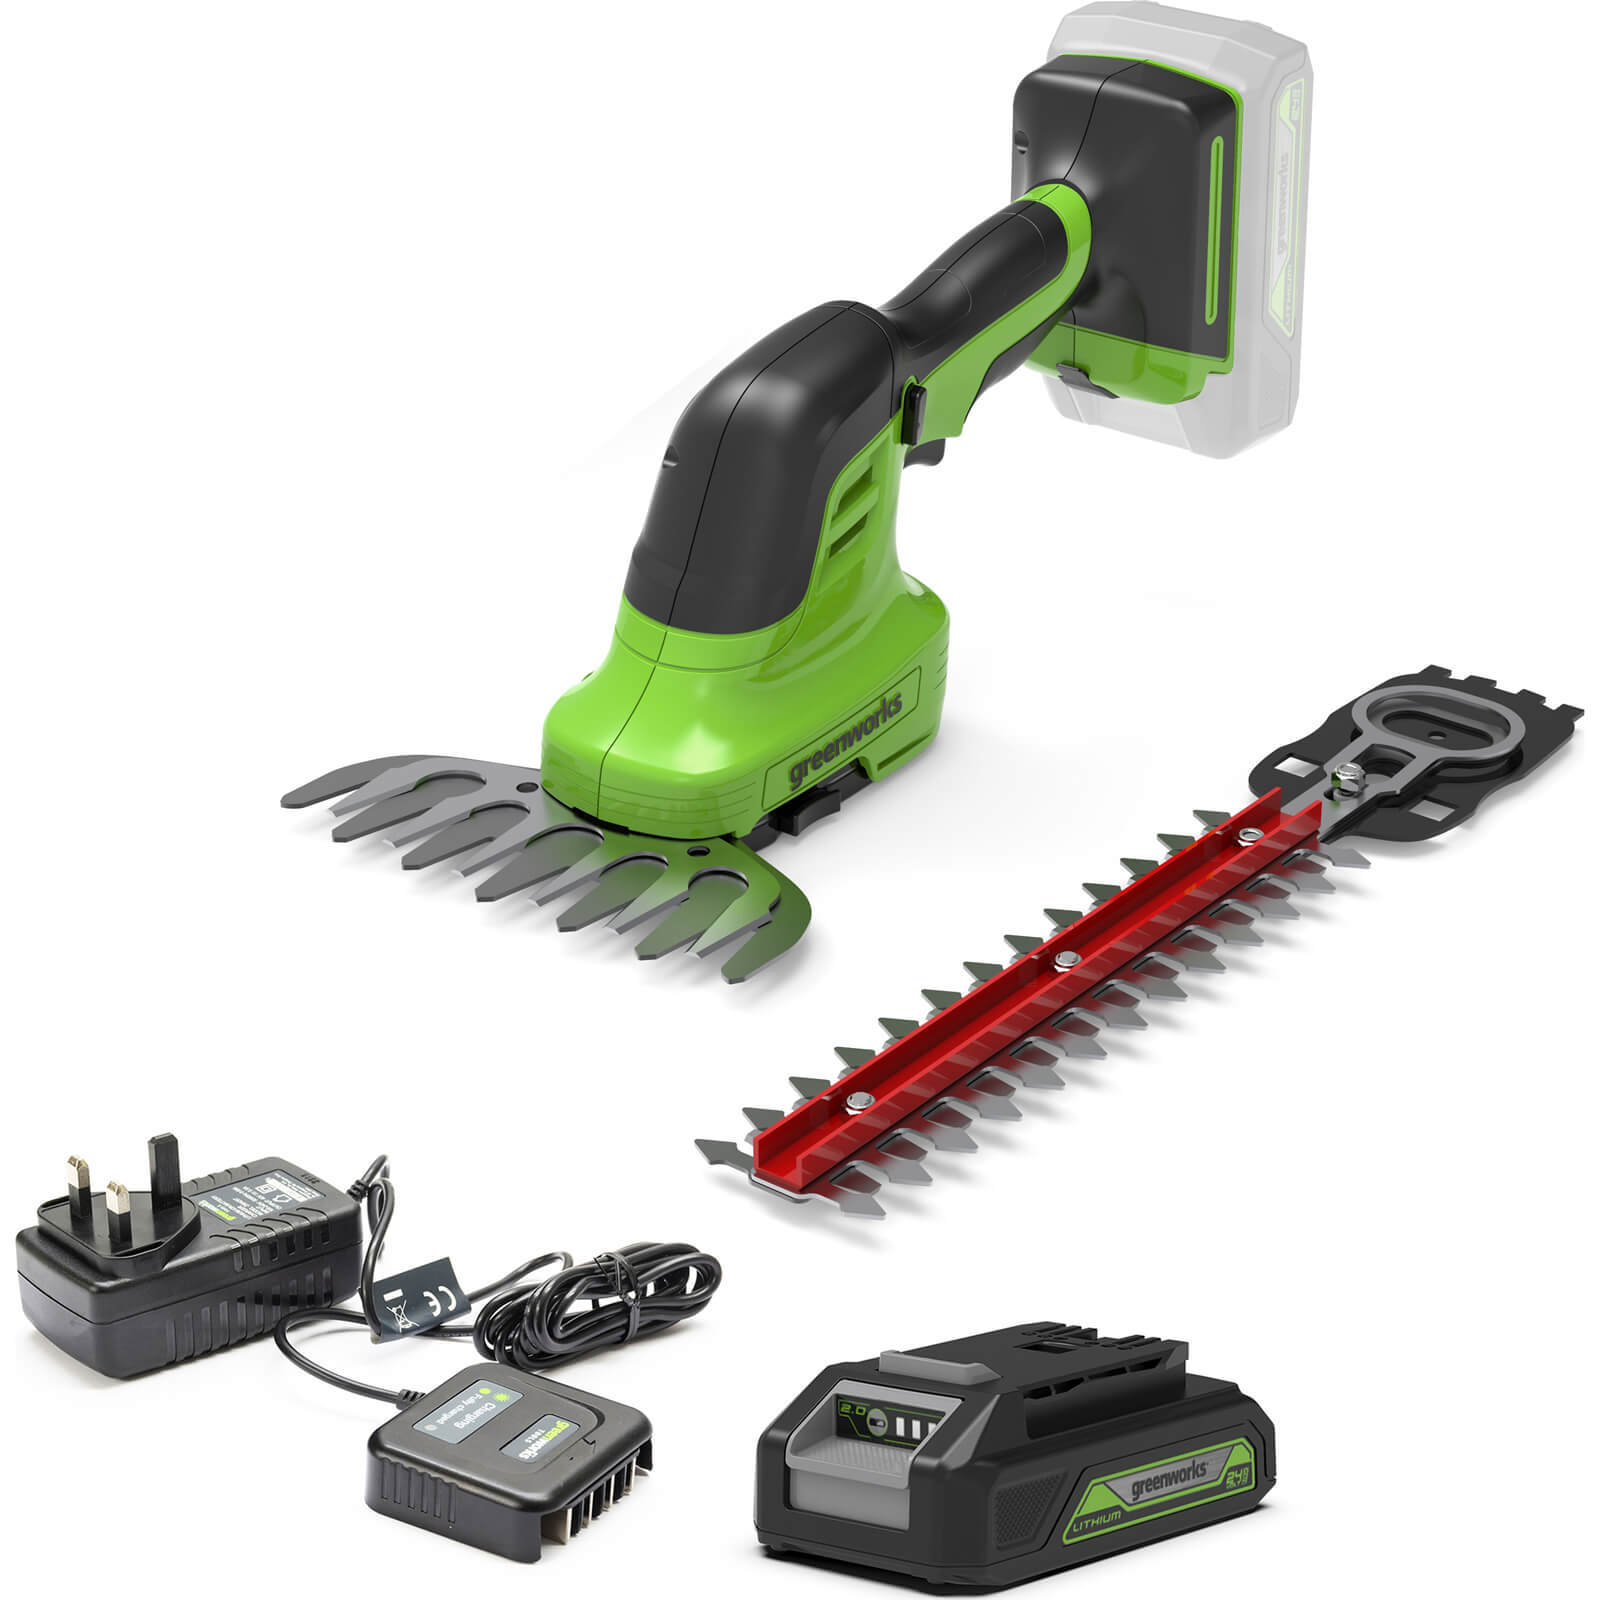 Greenworks G24SHT 24v Cordless Grass and Shrub Shears 1 x 2ah Li-ion Charger FREE Gloves, Lubricant & Safety Glasses Worth £12